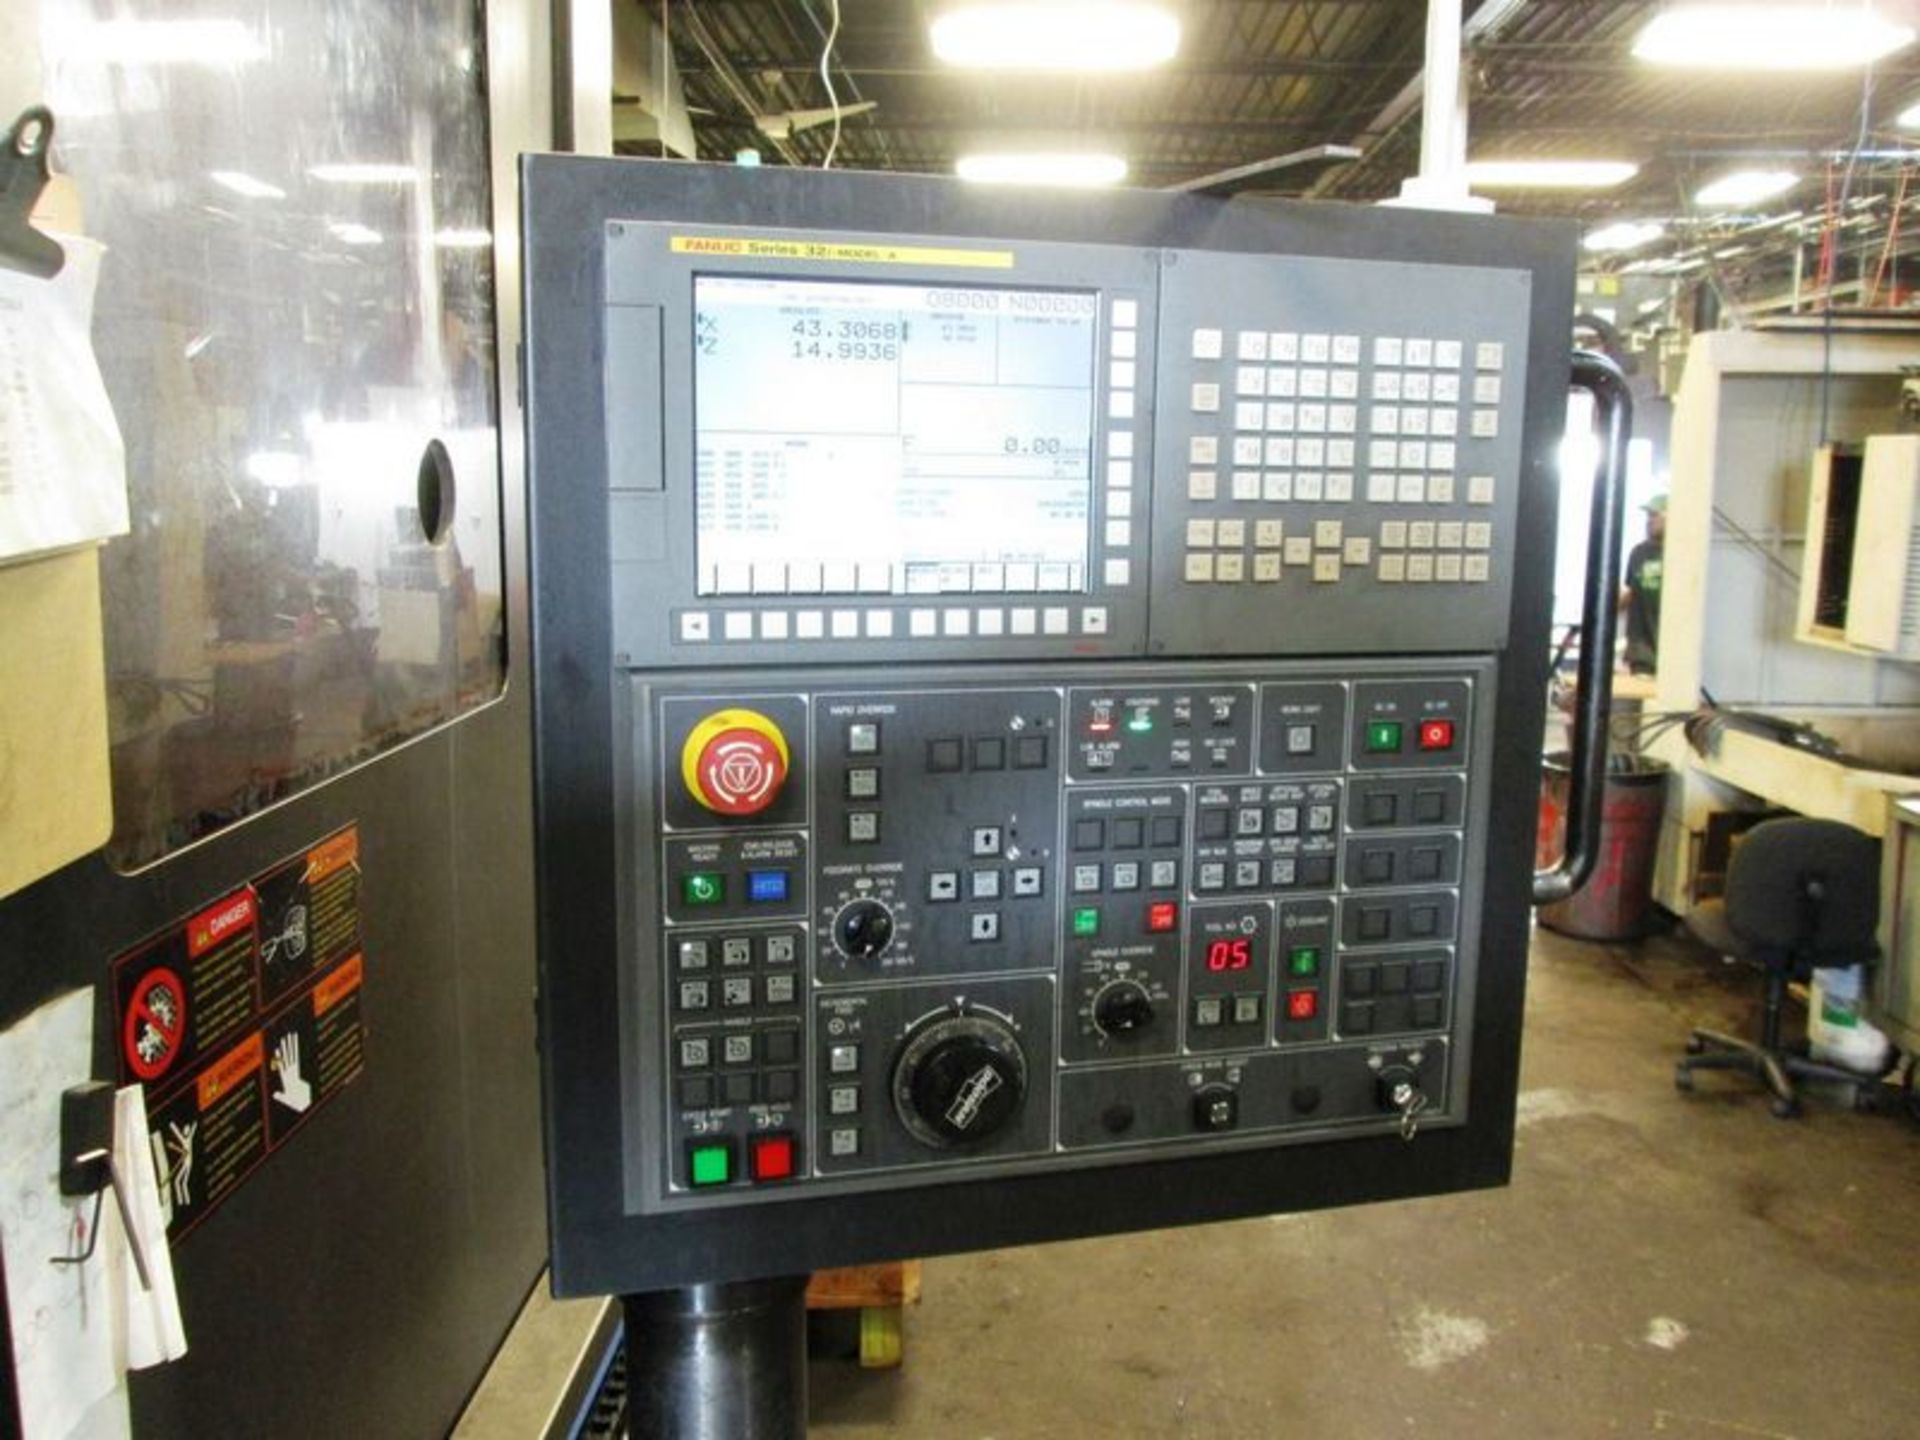 40" DOOSAN VT1100 2-AXIS CNC VERTICAL TURNING CENTER LATHE, NEW 2011 - Image 2 of 8